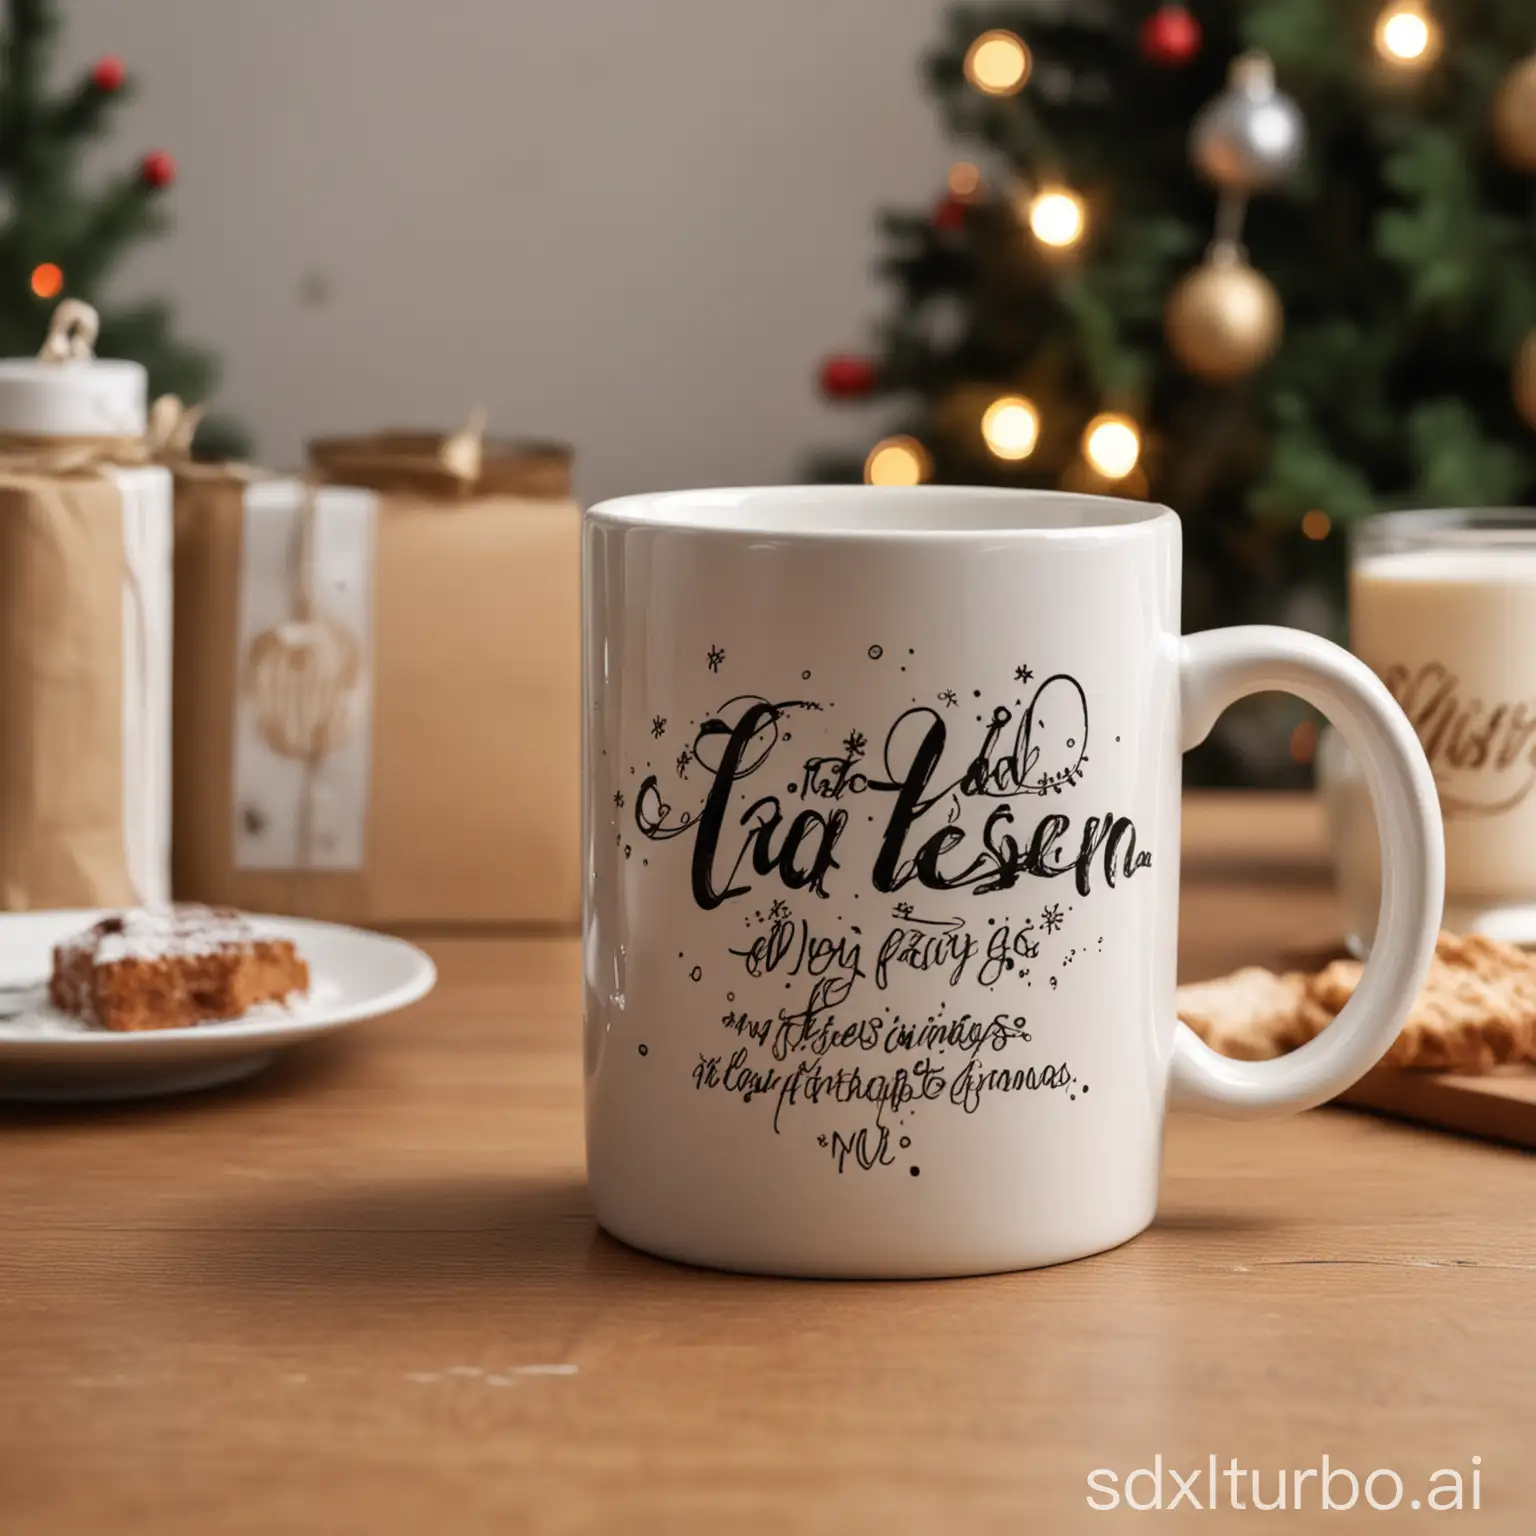  Ceramic mug printed with script text that reads "Add Your Design" exactly n initial caps at Christmas party with people drinking coffee in the background
(No translation required as the input is already in English)